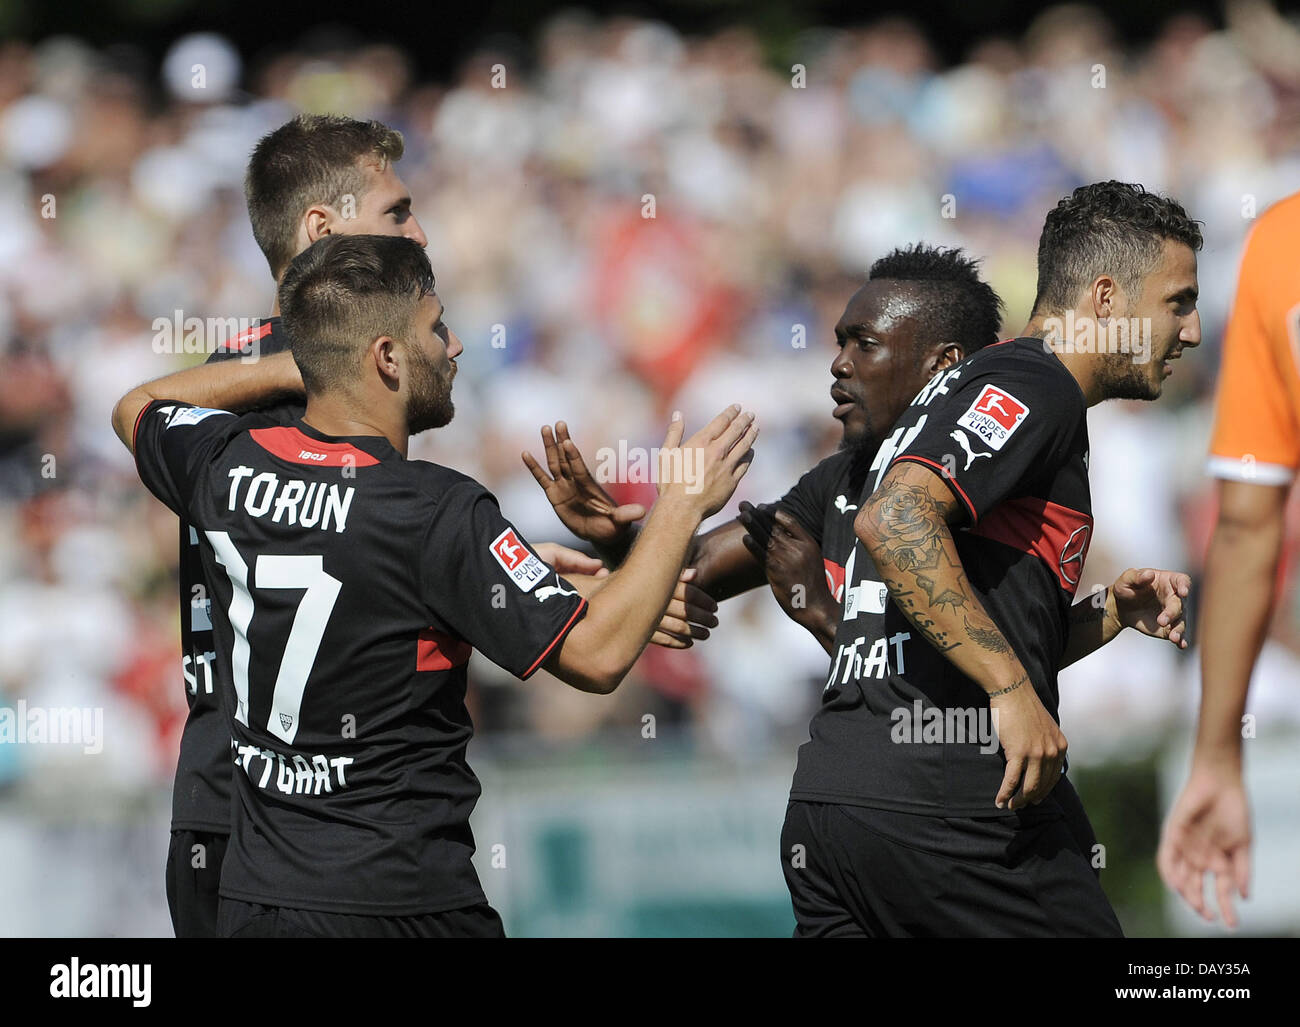 Ludwigsburg, Germany. 20th July, 2013. Stuttgart's Daniel Schwaab (L-R), Torun Tunay, Arthur Boka and Sercan Sararer celebrate after the 1-0 goal during the test match between VfB Stuttgart and FC Valencia at Ludwig-Jahn-Stadium in Ludwigsburg, Germany, 20 July 2013. Photo: DANIEL MAURER/dpa/Alamy Live News Stock Photo